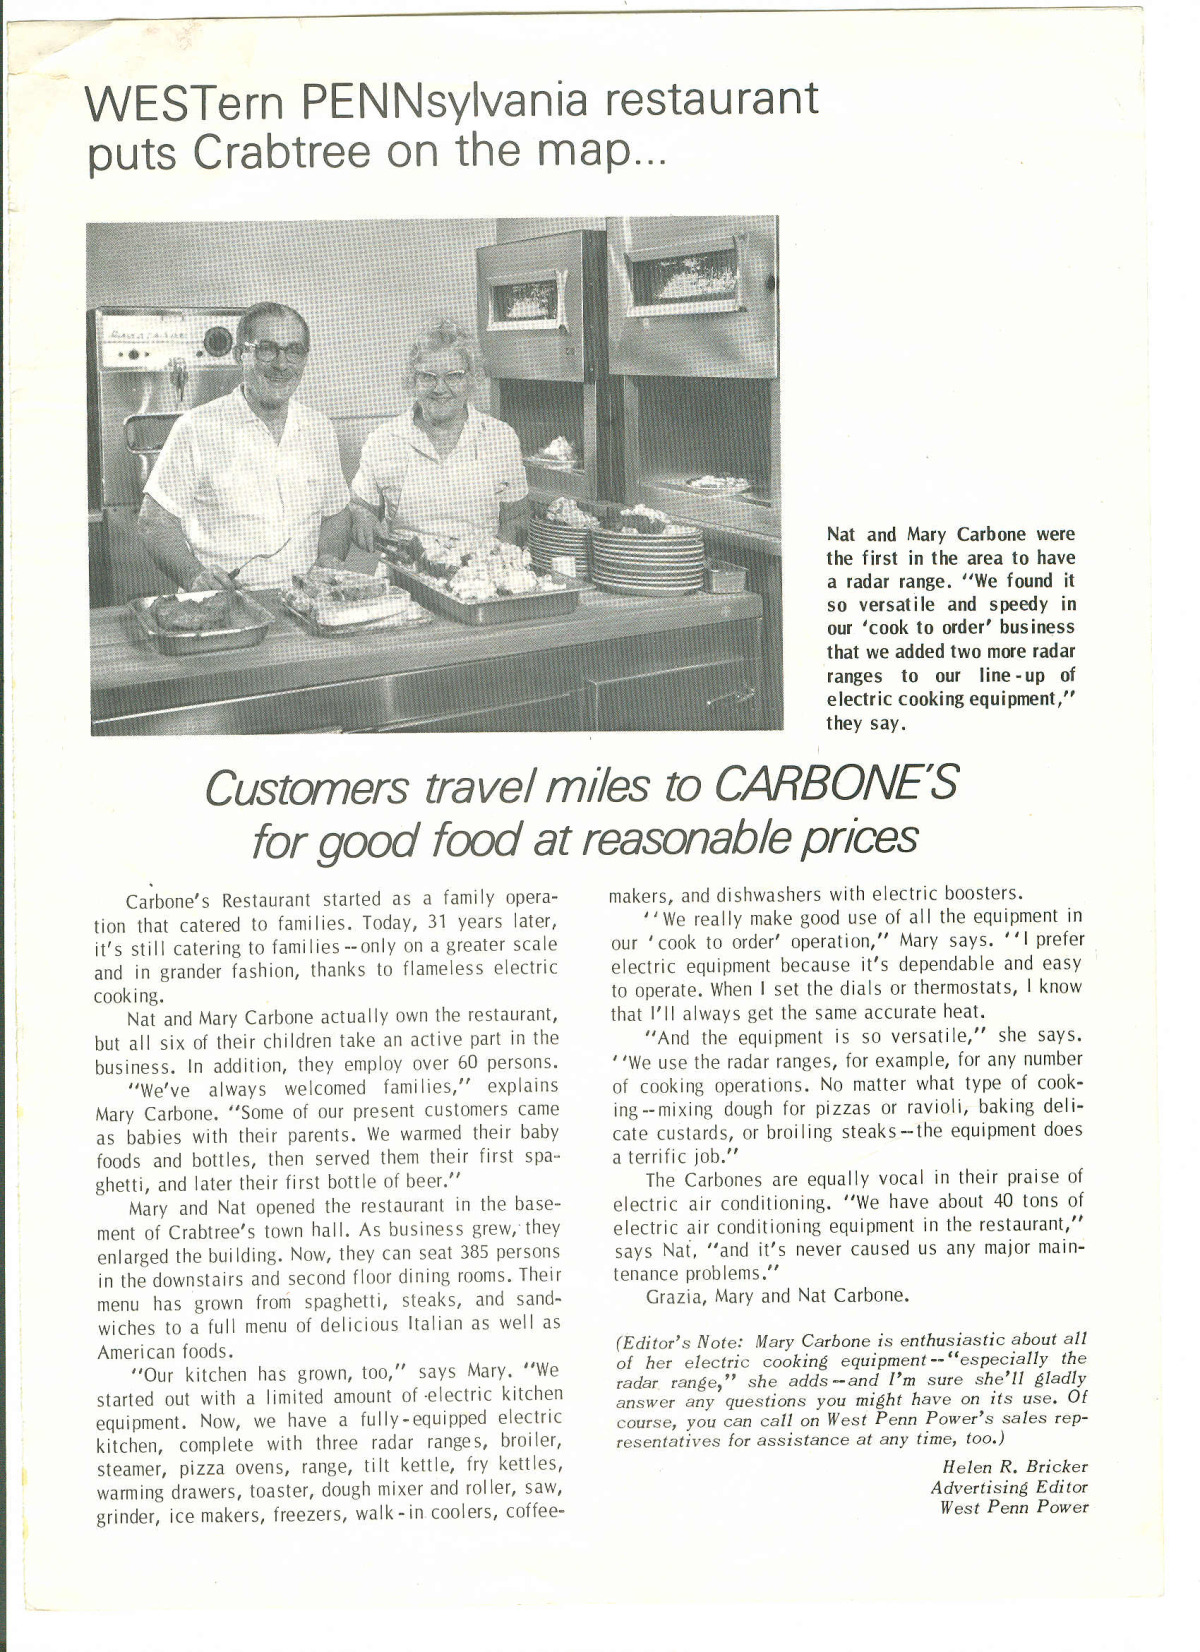 article in west penn power magazine about carbone's use of r.jpg